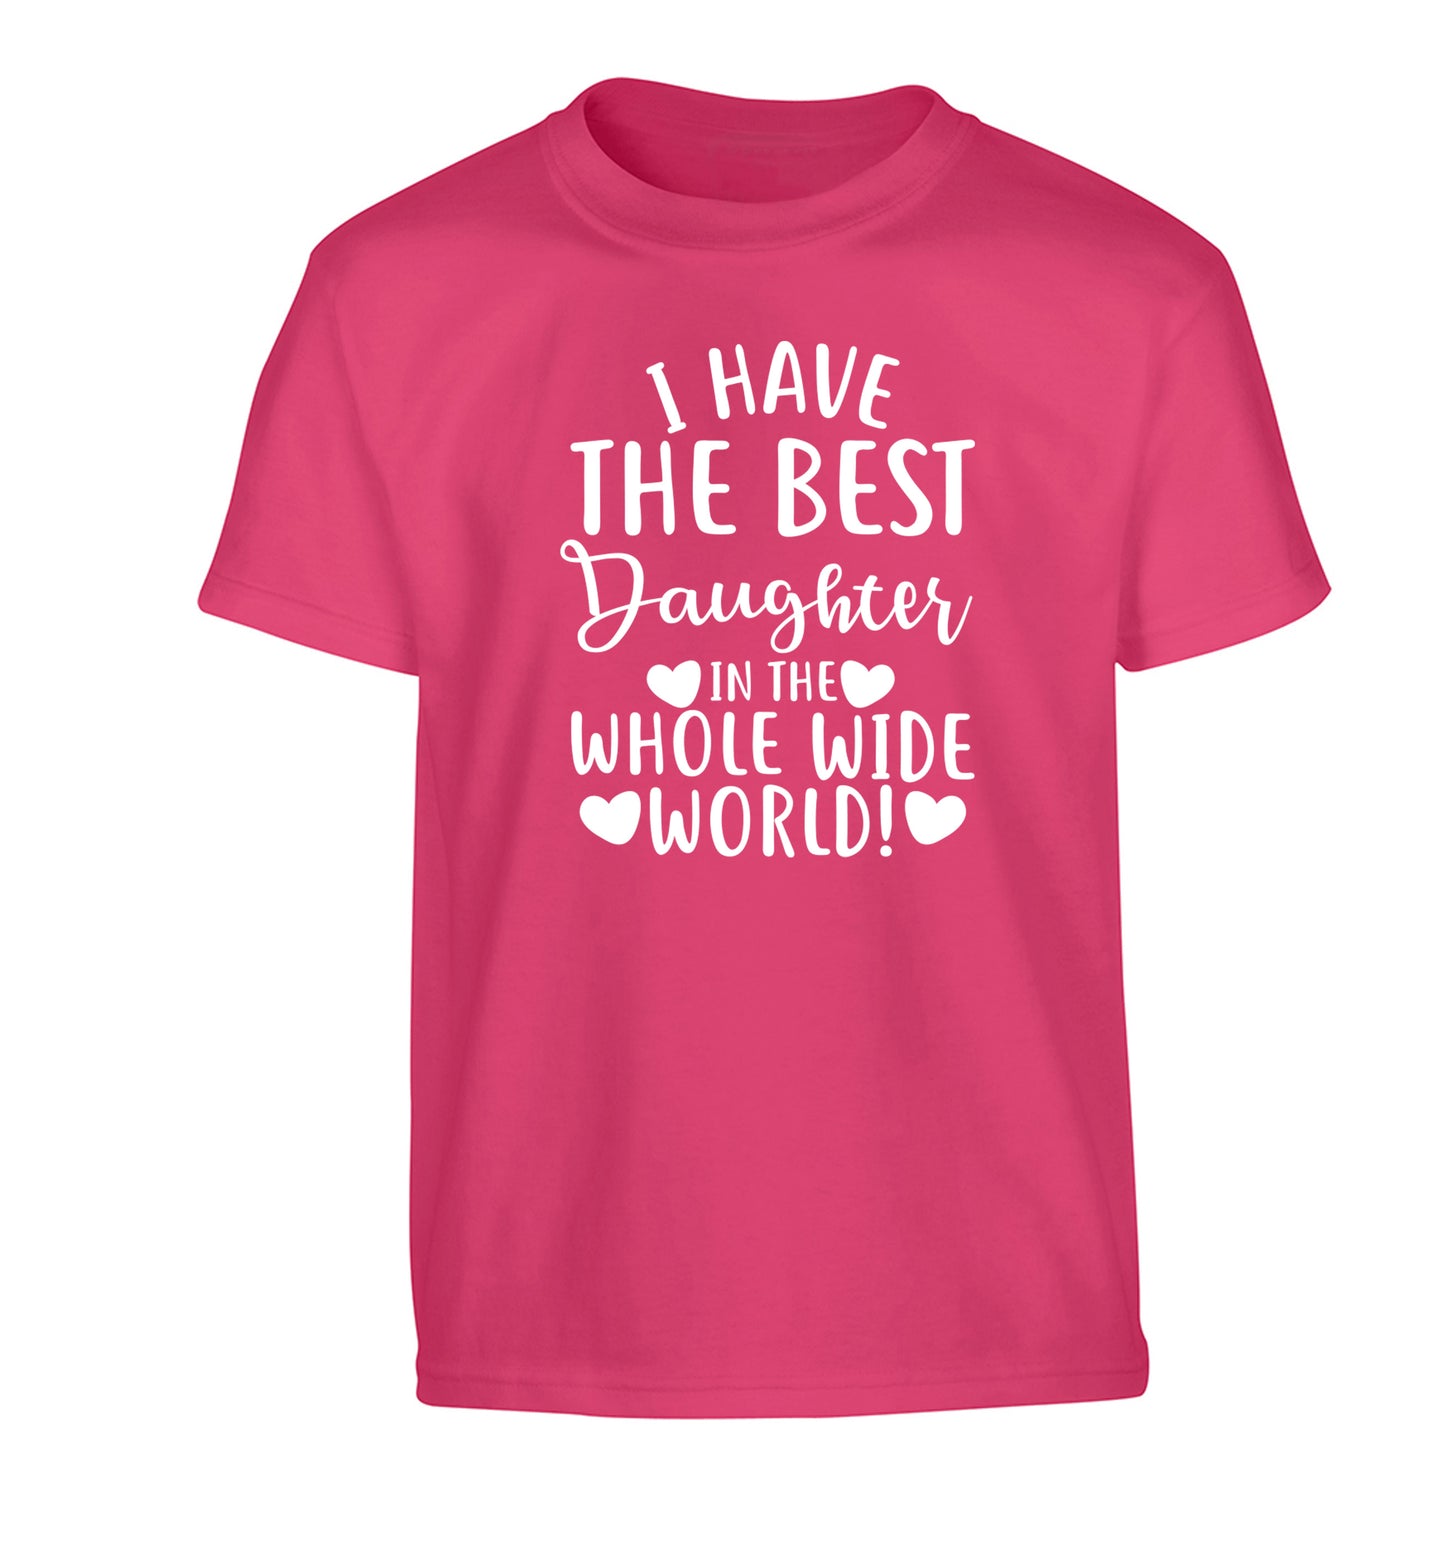 I have the best daughter in the whole wide world! Children's pink Tshirt 12-13 Years